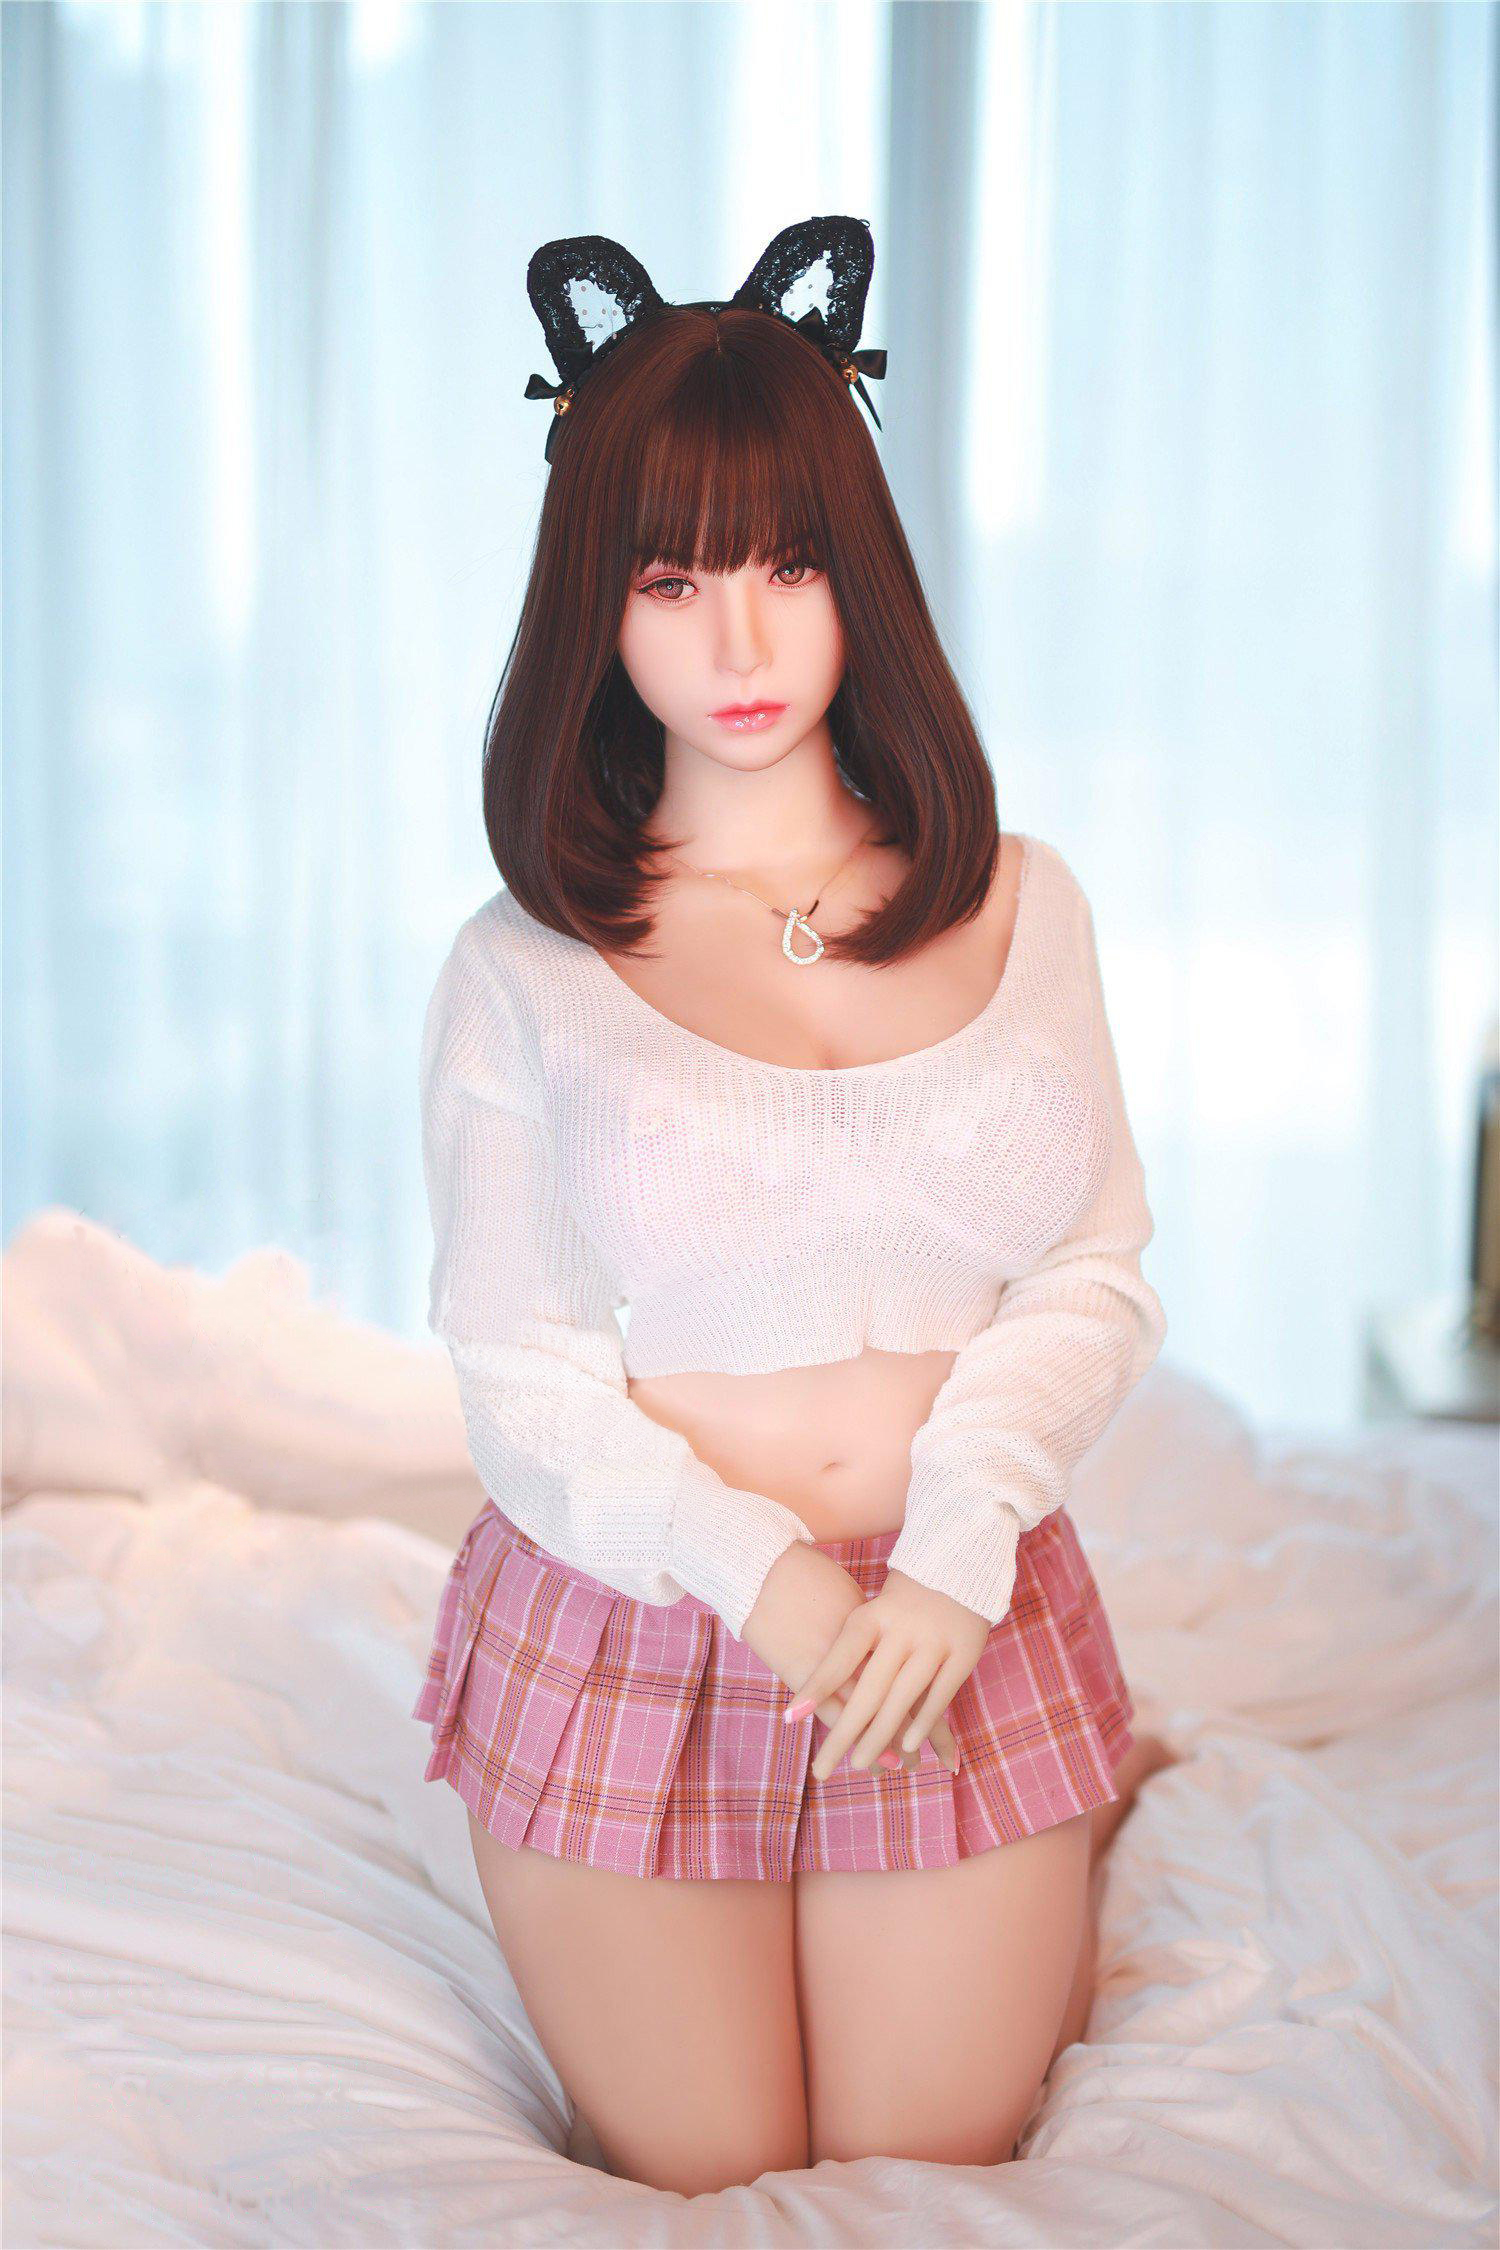 Ling-Juicy-Asian-Sex-Doll-26